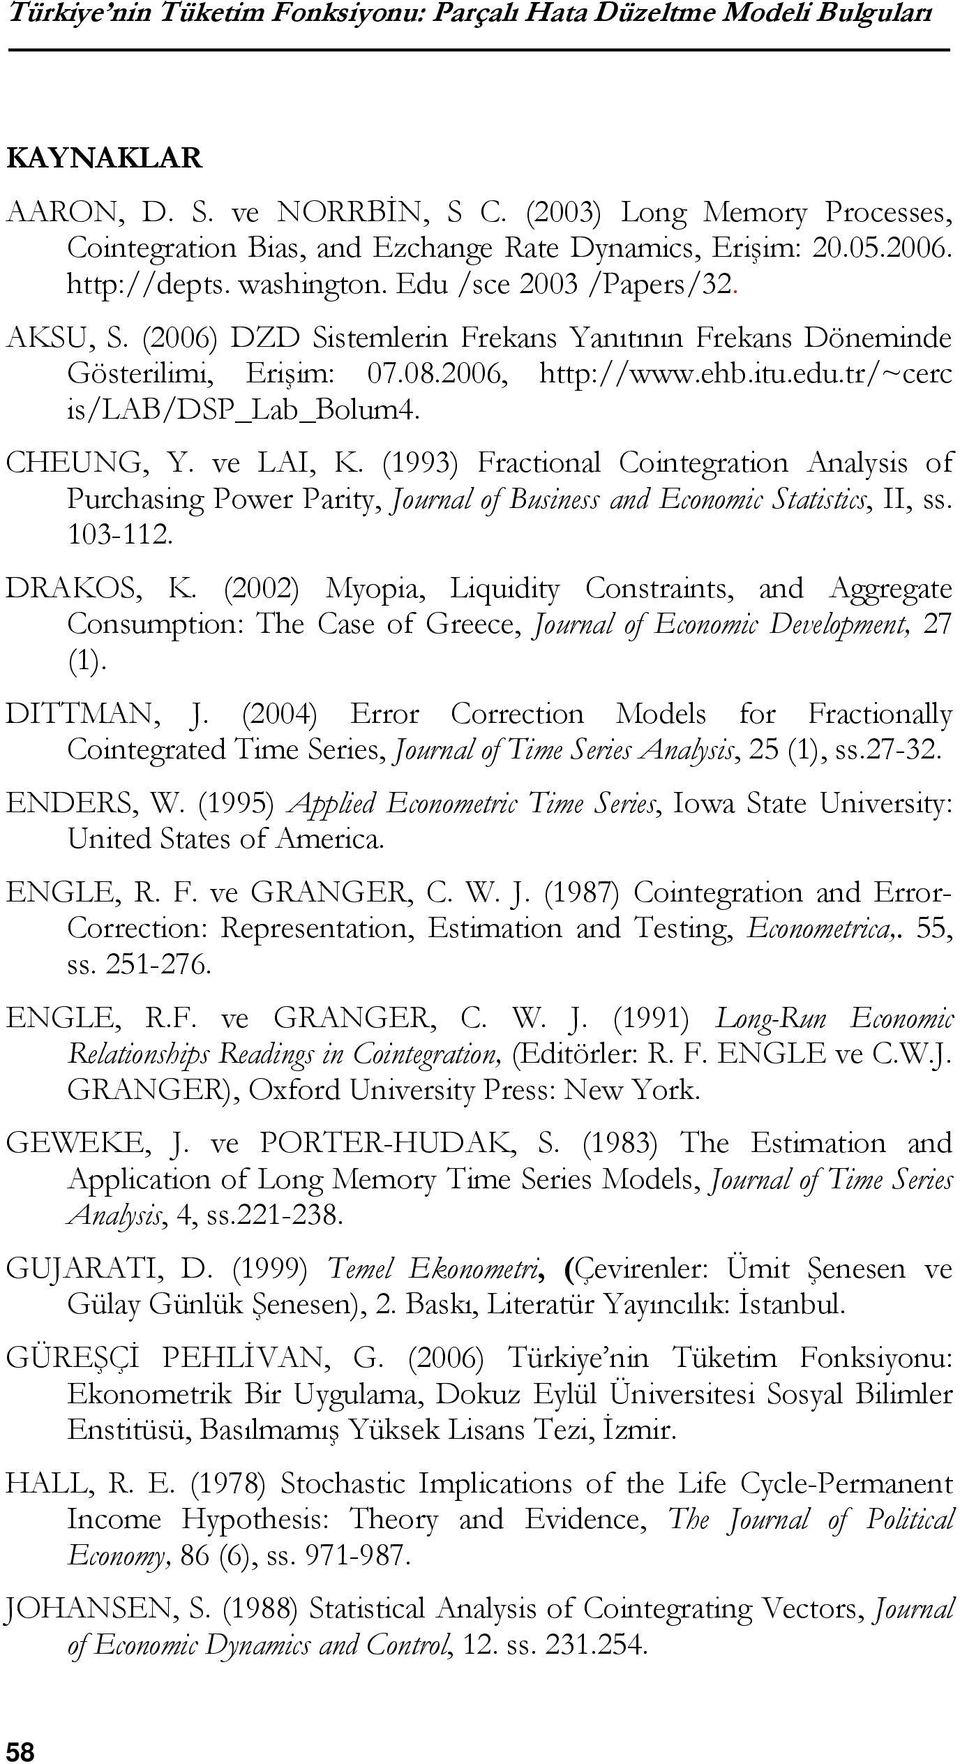 tr/~cerc is/lab/dsp_lab_bolum4. CHEUNG, Y. ve LAI, K. (1993) Fractional Cointegration Analysis of Purchasing Power Parity, Journal of Business and Economic Statistics, II, ss. 103-112. DRAKOS, K.